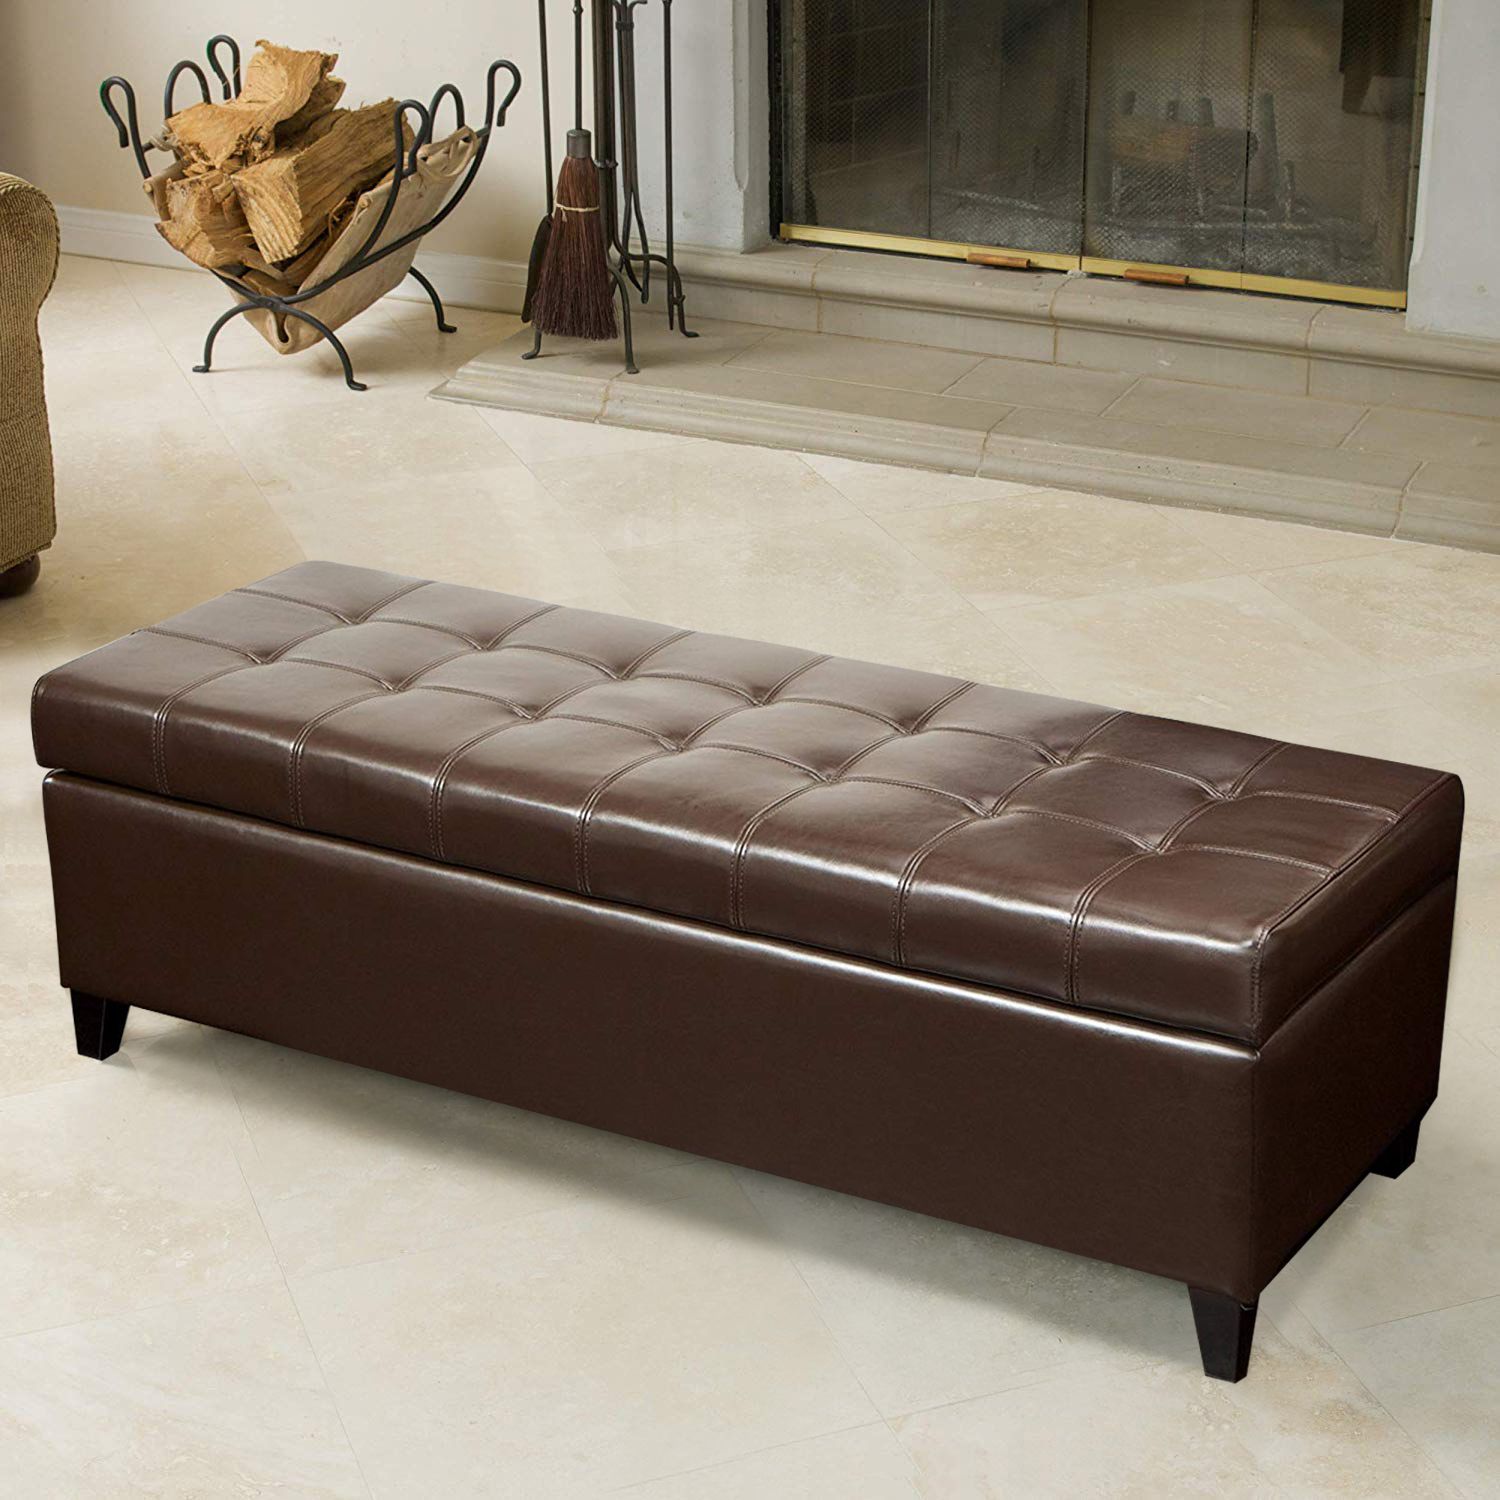 Brown Tufted Pouf Ottomans Within 2017 Joveco Leather Accents Rectangular Tufted Storage Ottoman Footstool (View 7 of 10)